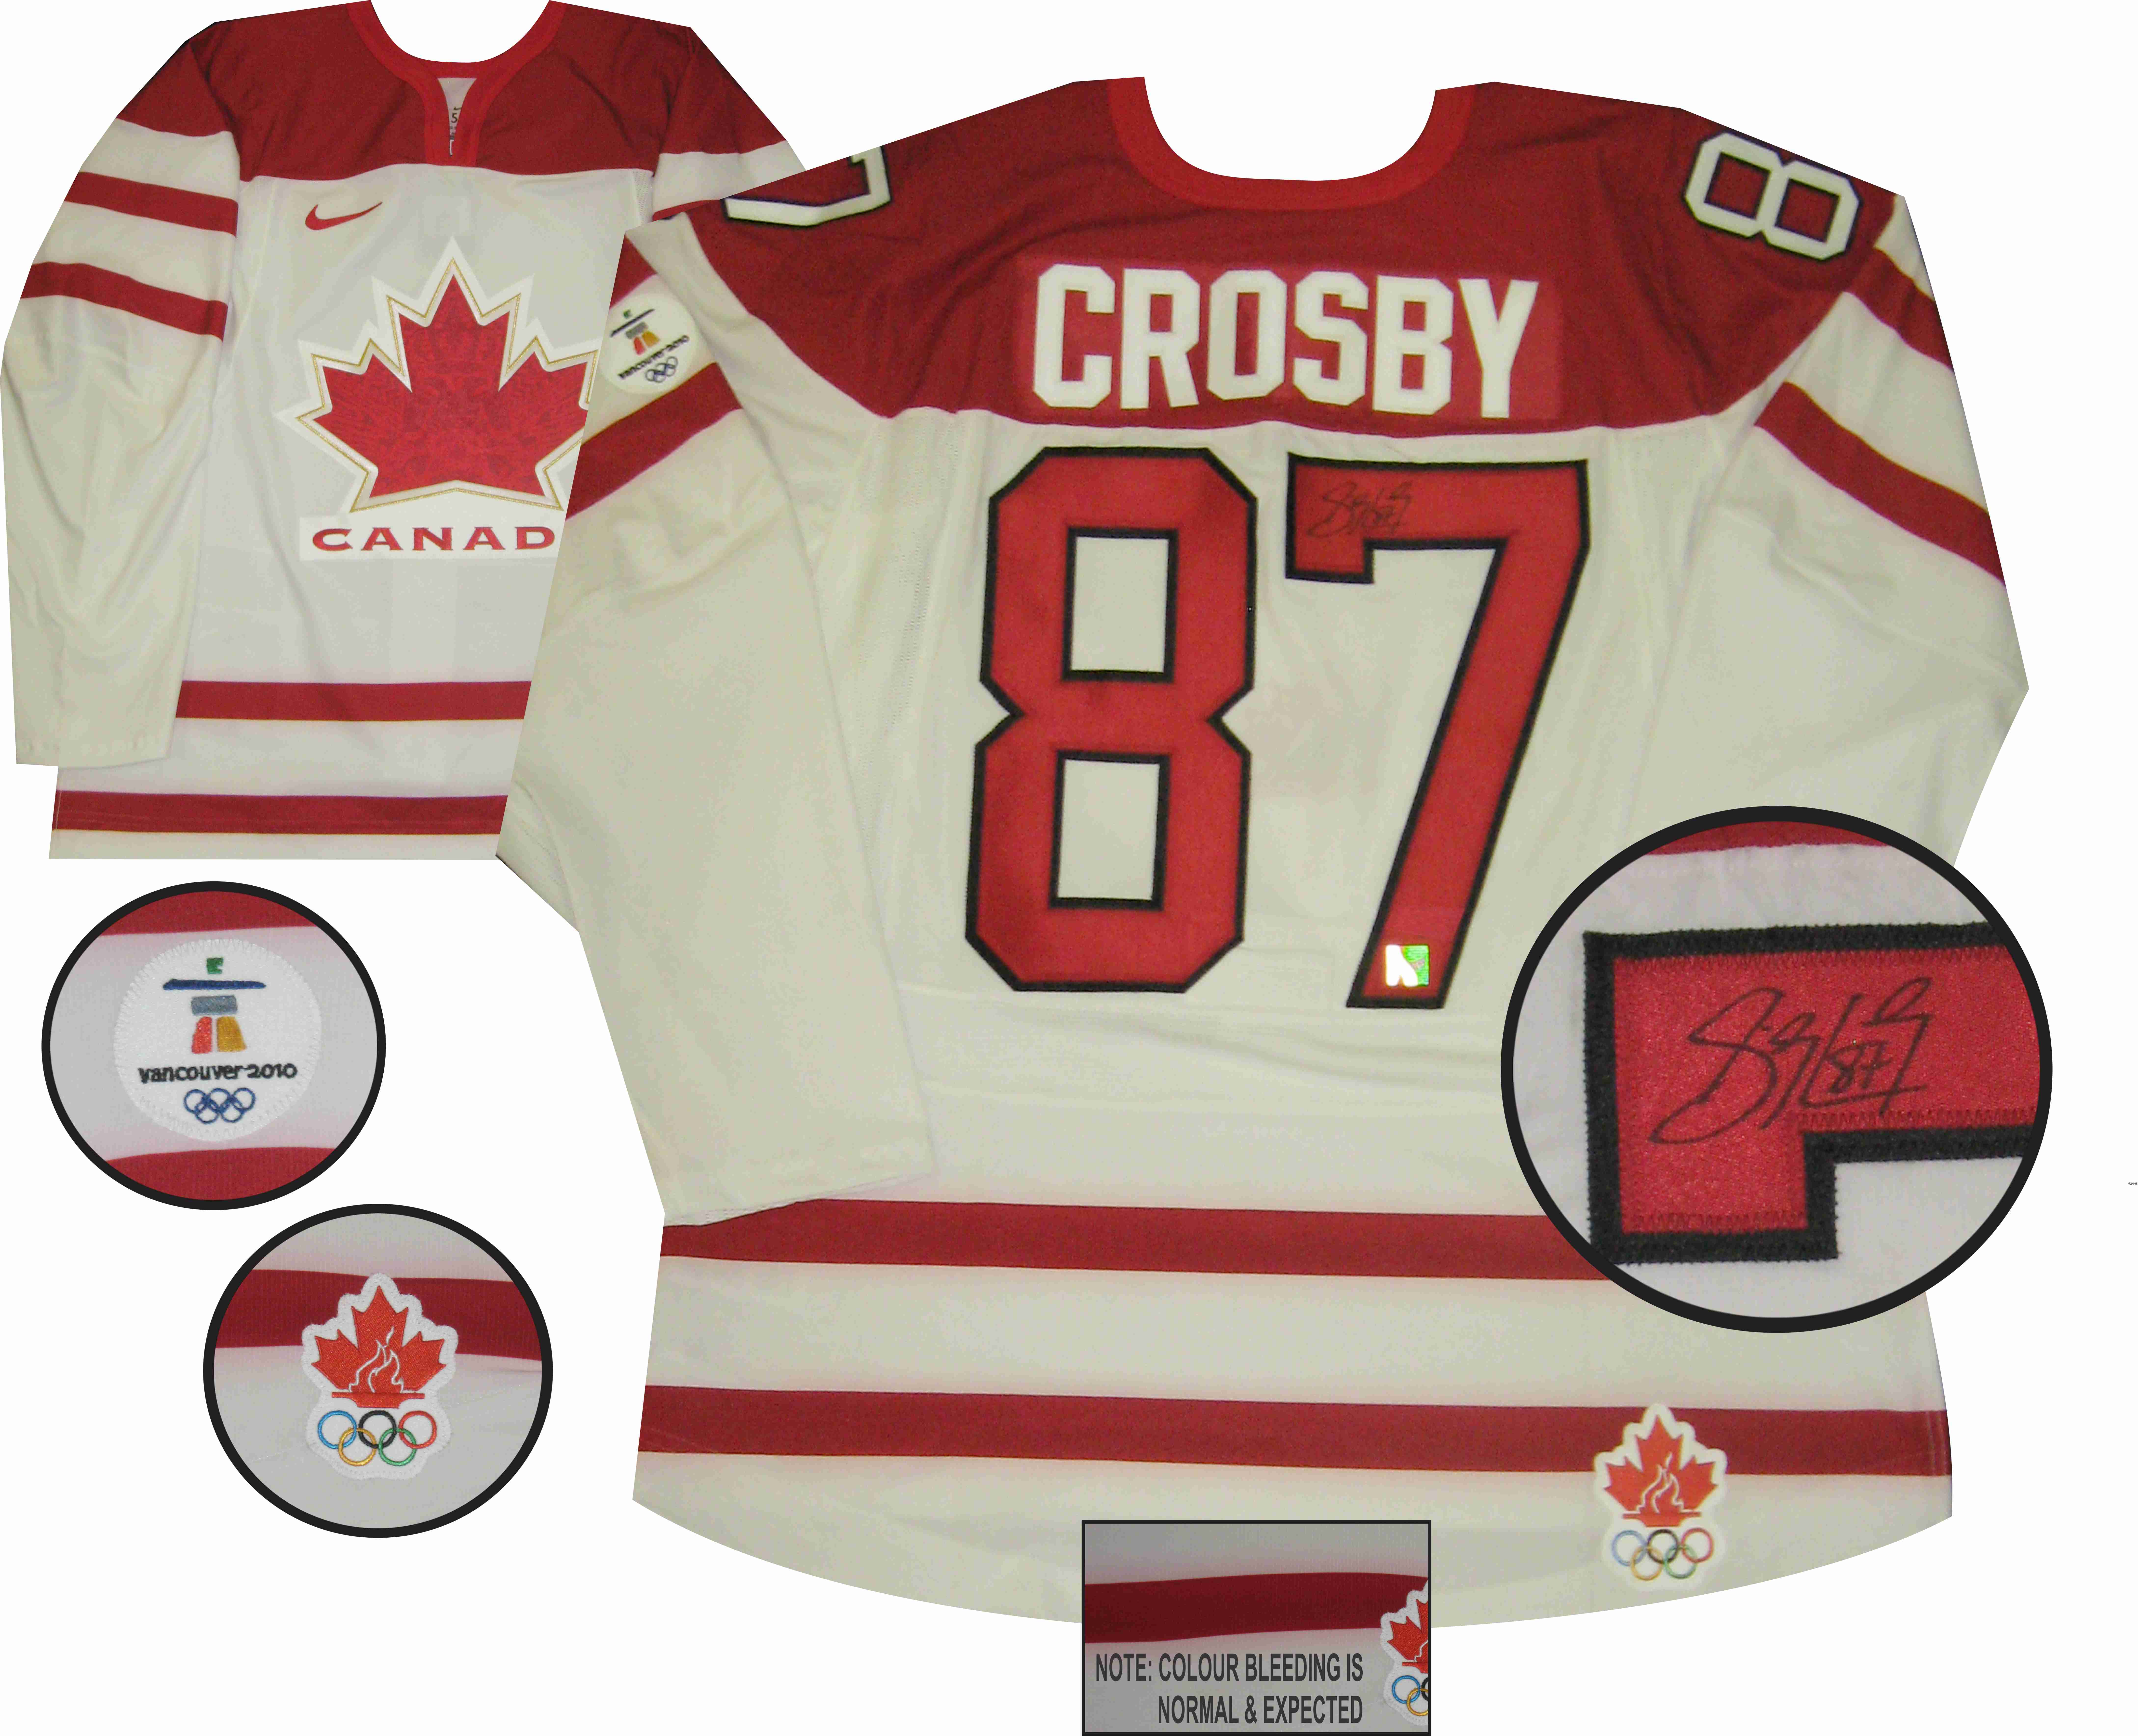 2010 Sidney Crosby Team Canada Olympics Game Worn Jersey - 1st Olympic  Jersey - Vancouver 2010 Olympics - Photo Match - Team Canada Letter